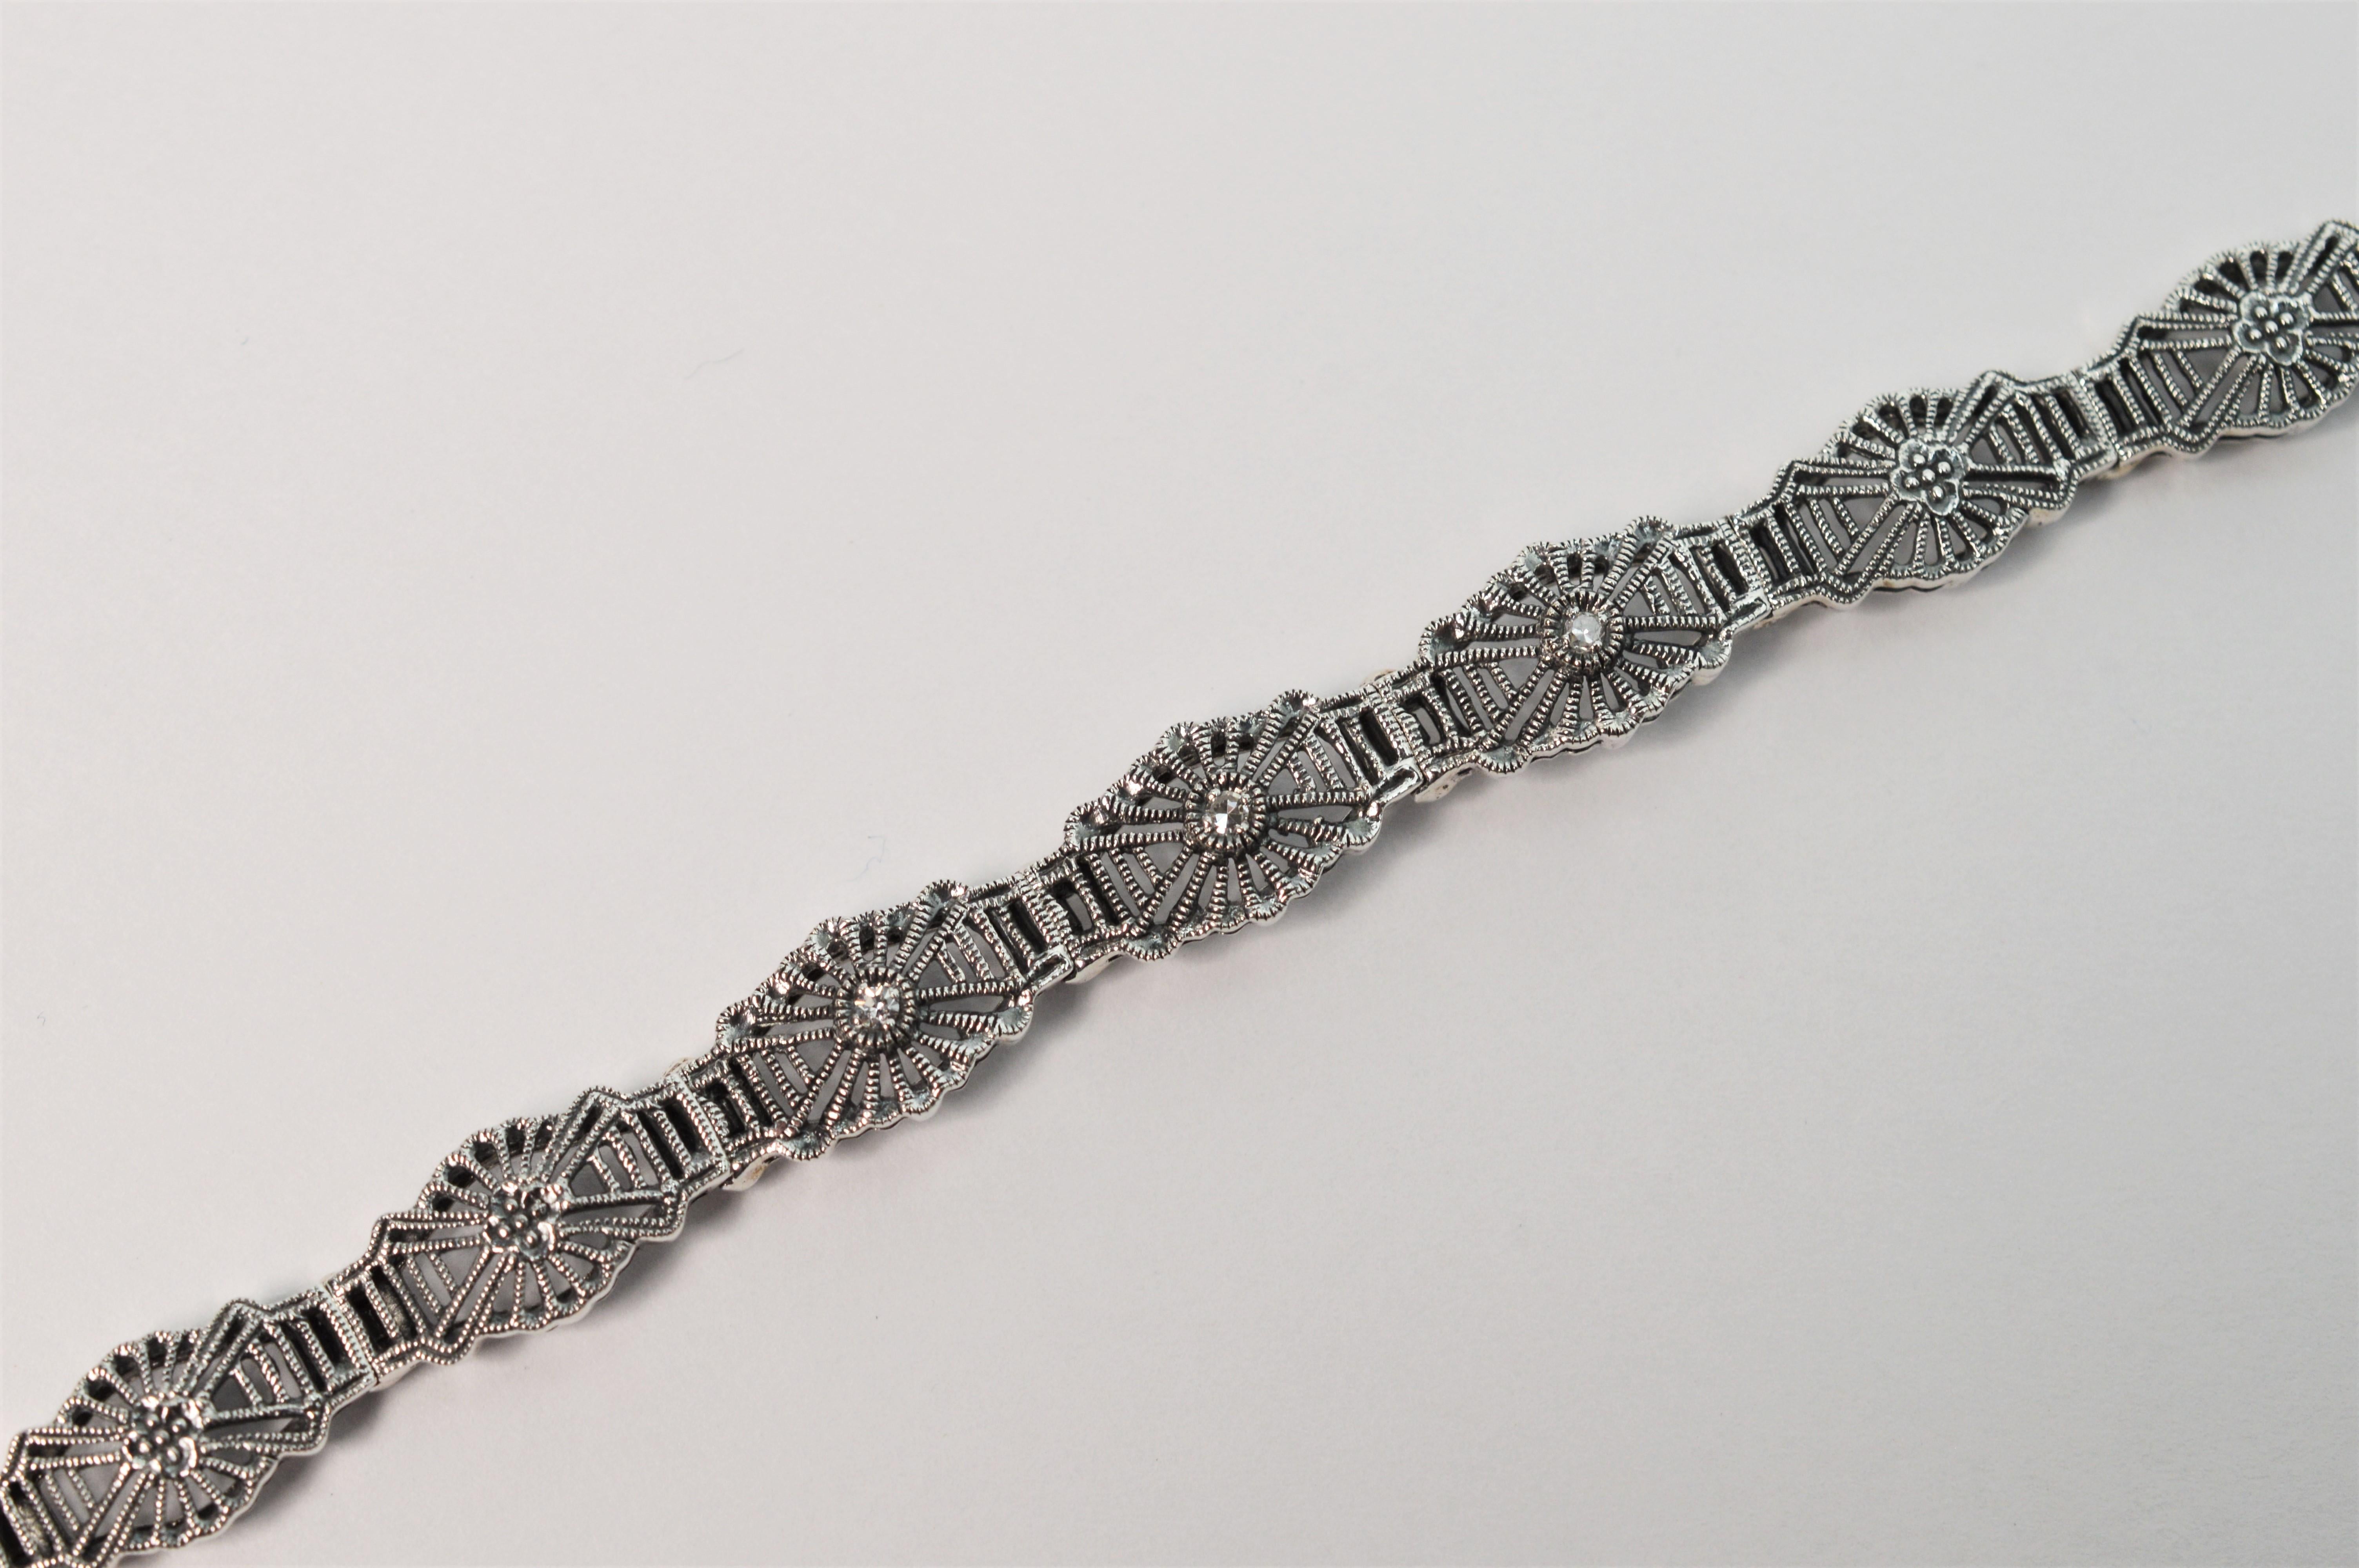 Three diamond accents highlight the front of this romantic Art Deco Style sterling silver filigree link bracelet. This new, vintage inspired bracelet is 7.5 inches in length 
and approximately 2/8 inch wide. Individual links of delicate sterling